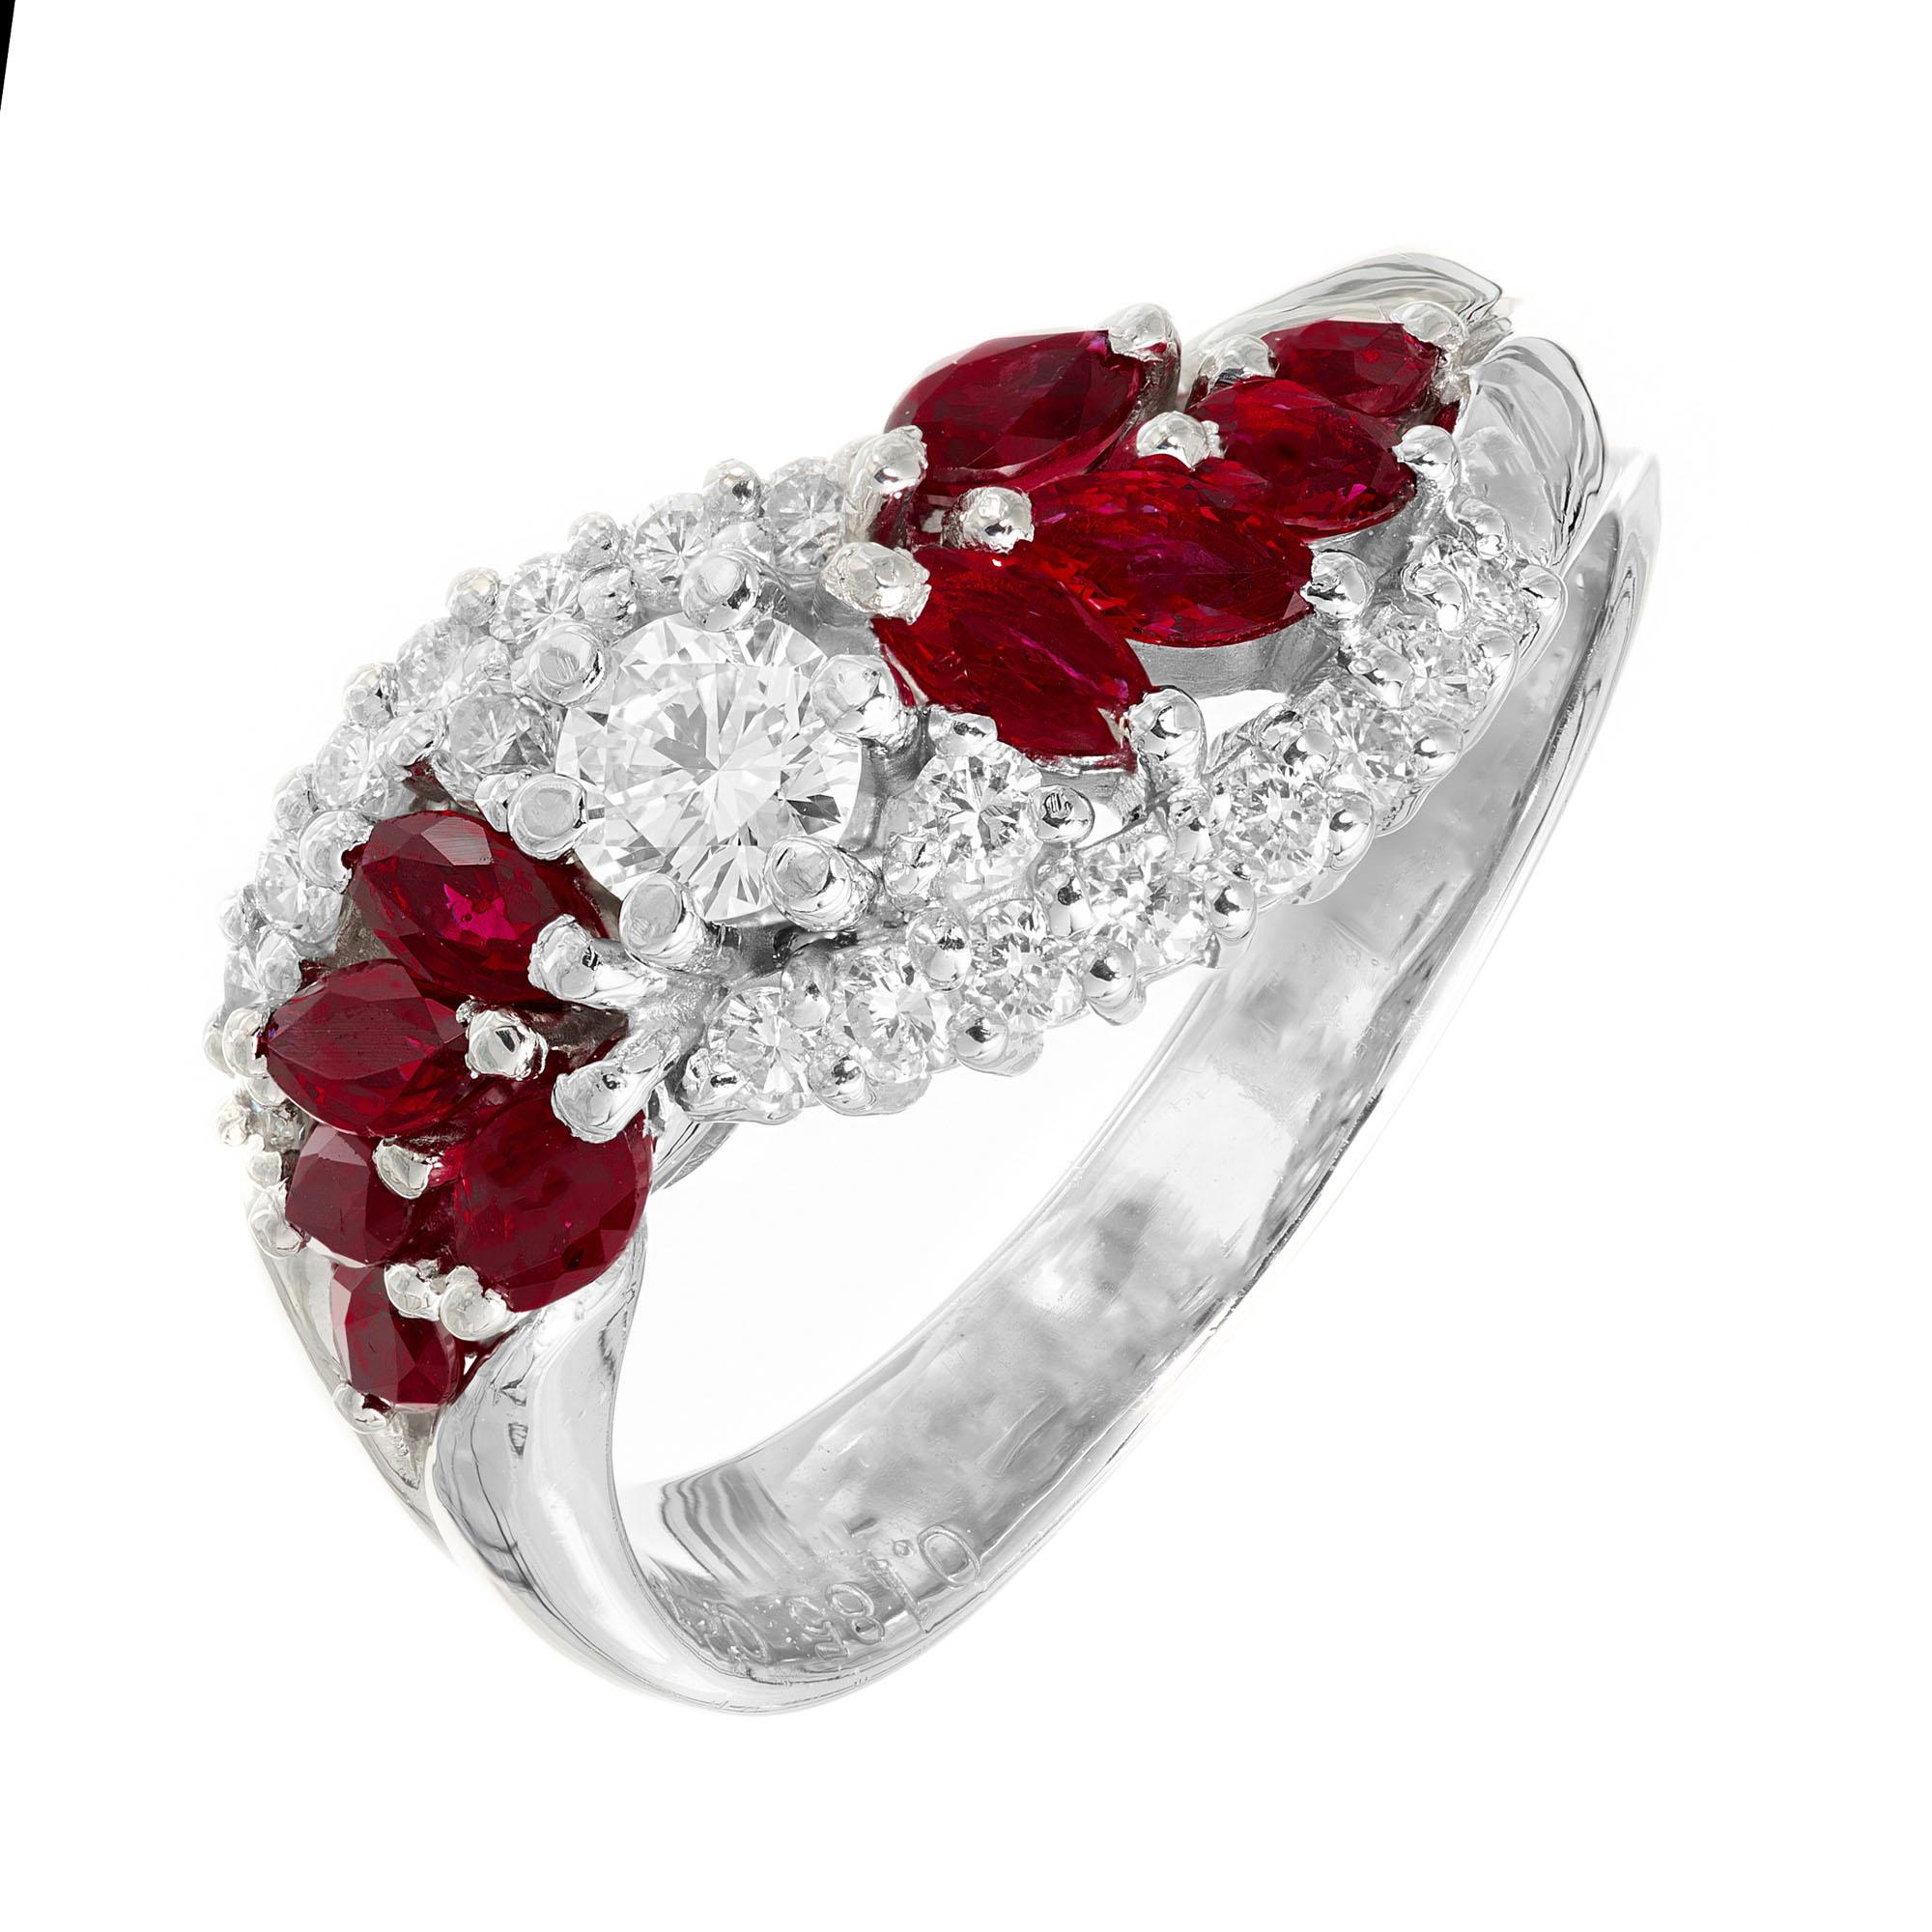 Ruby and diamond band ring. .18ct round brilliant cut center diamonds with 10 marquise cut rubies and 18 round brilliant cut diamonds in a swirl cluster setting.  

1 round brilliant cut diamonds, I-J SI approx. .18cts
18 round brilliant cut